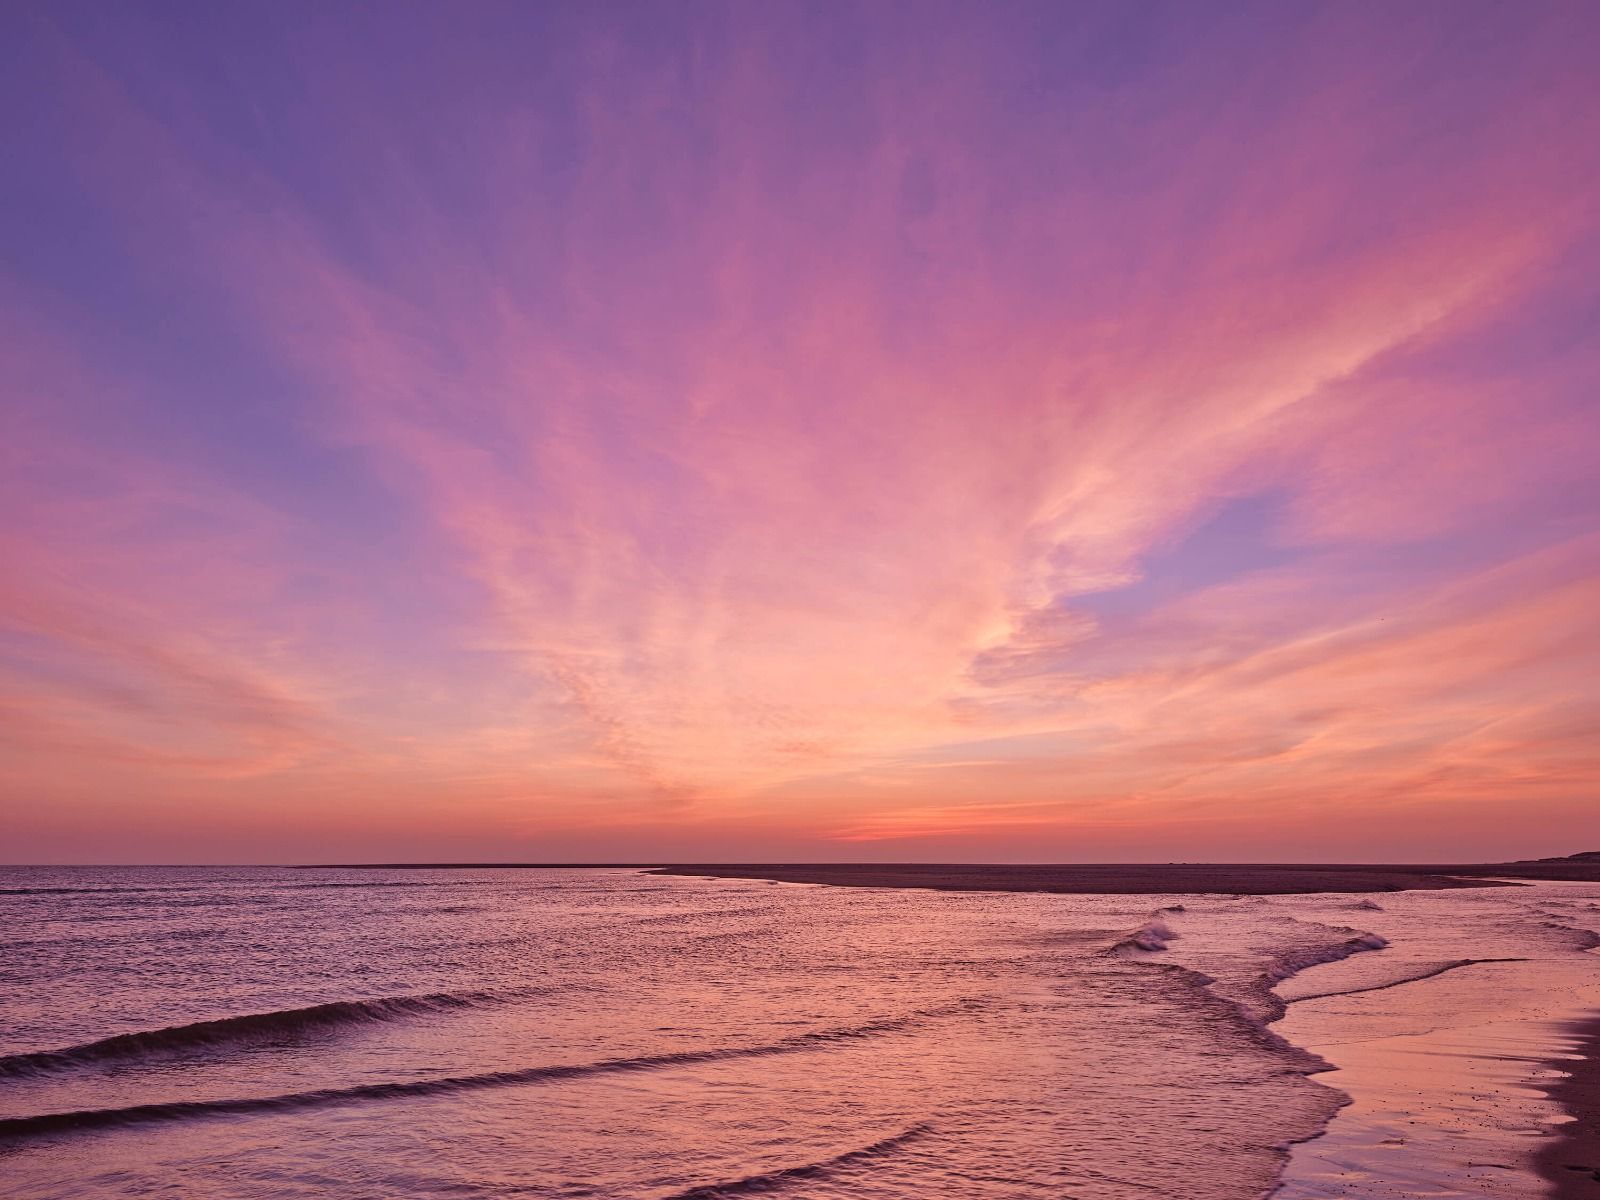 Beach with pink sunset - Photo Wallpaper